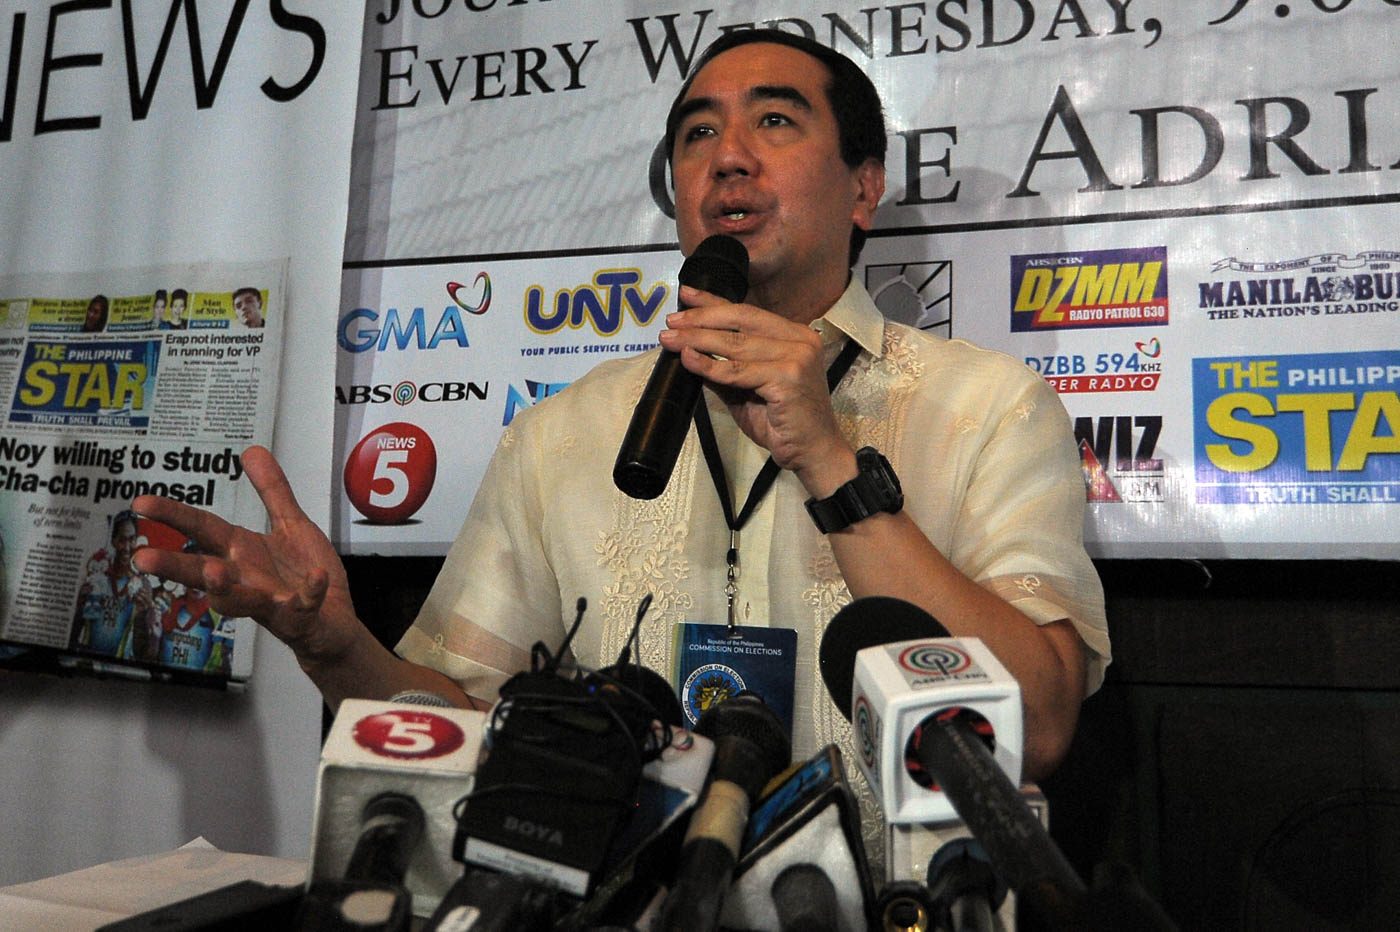 Comelec Chairman Bautista to ‘abide’ by impeachment rules